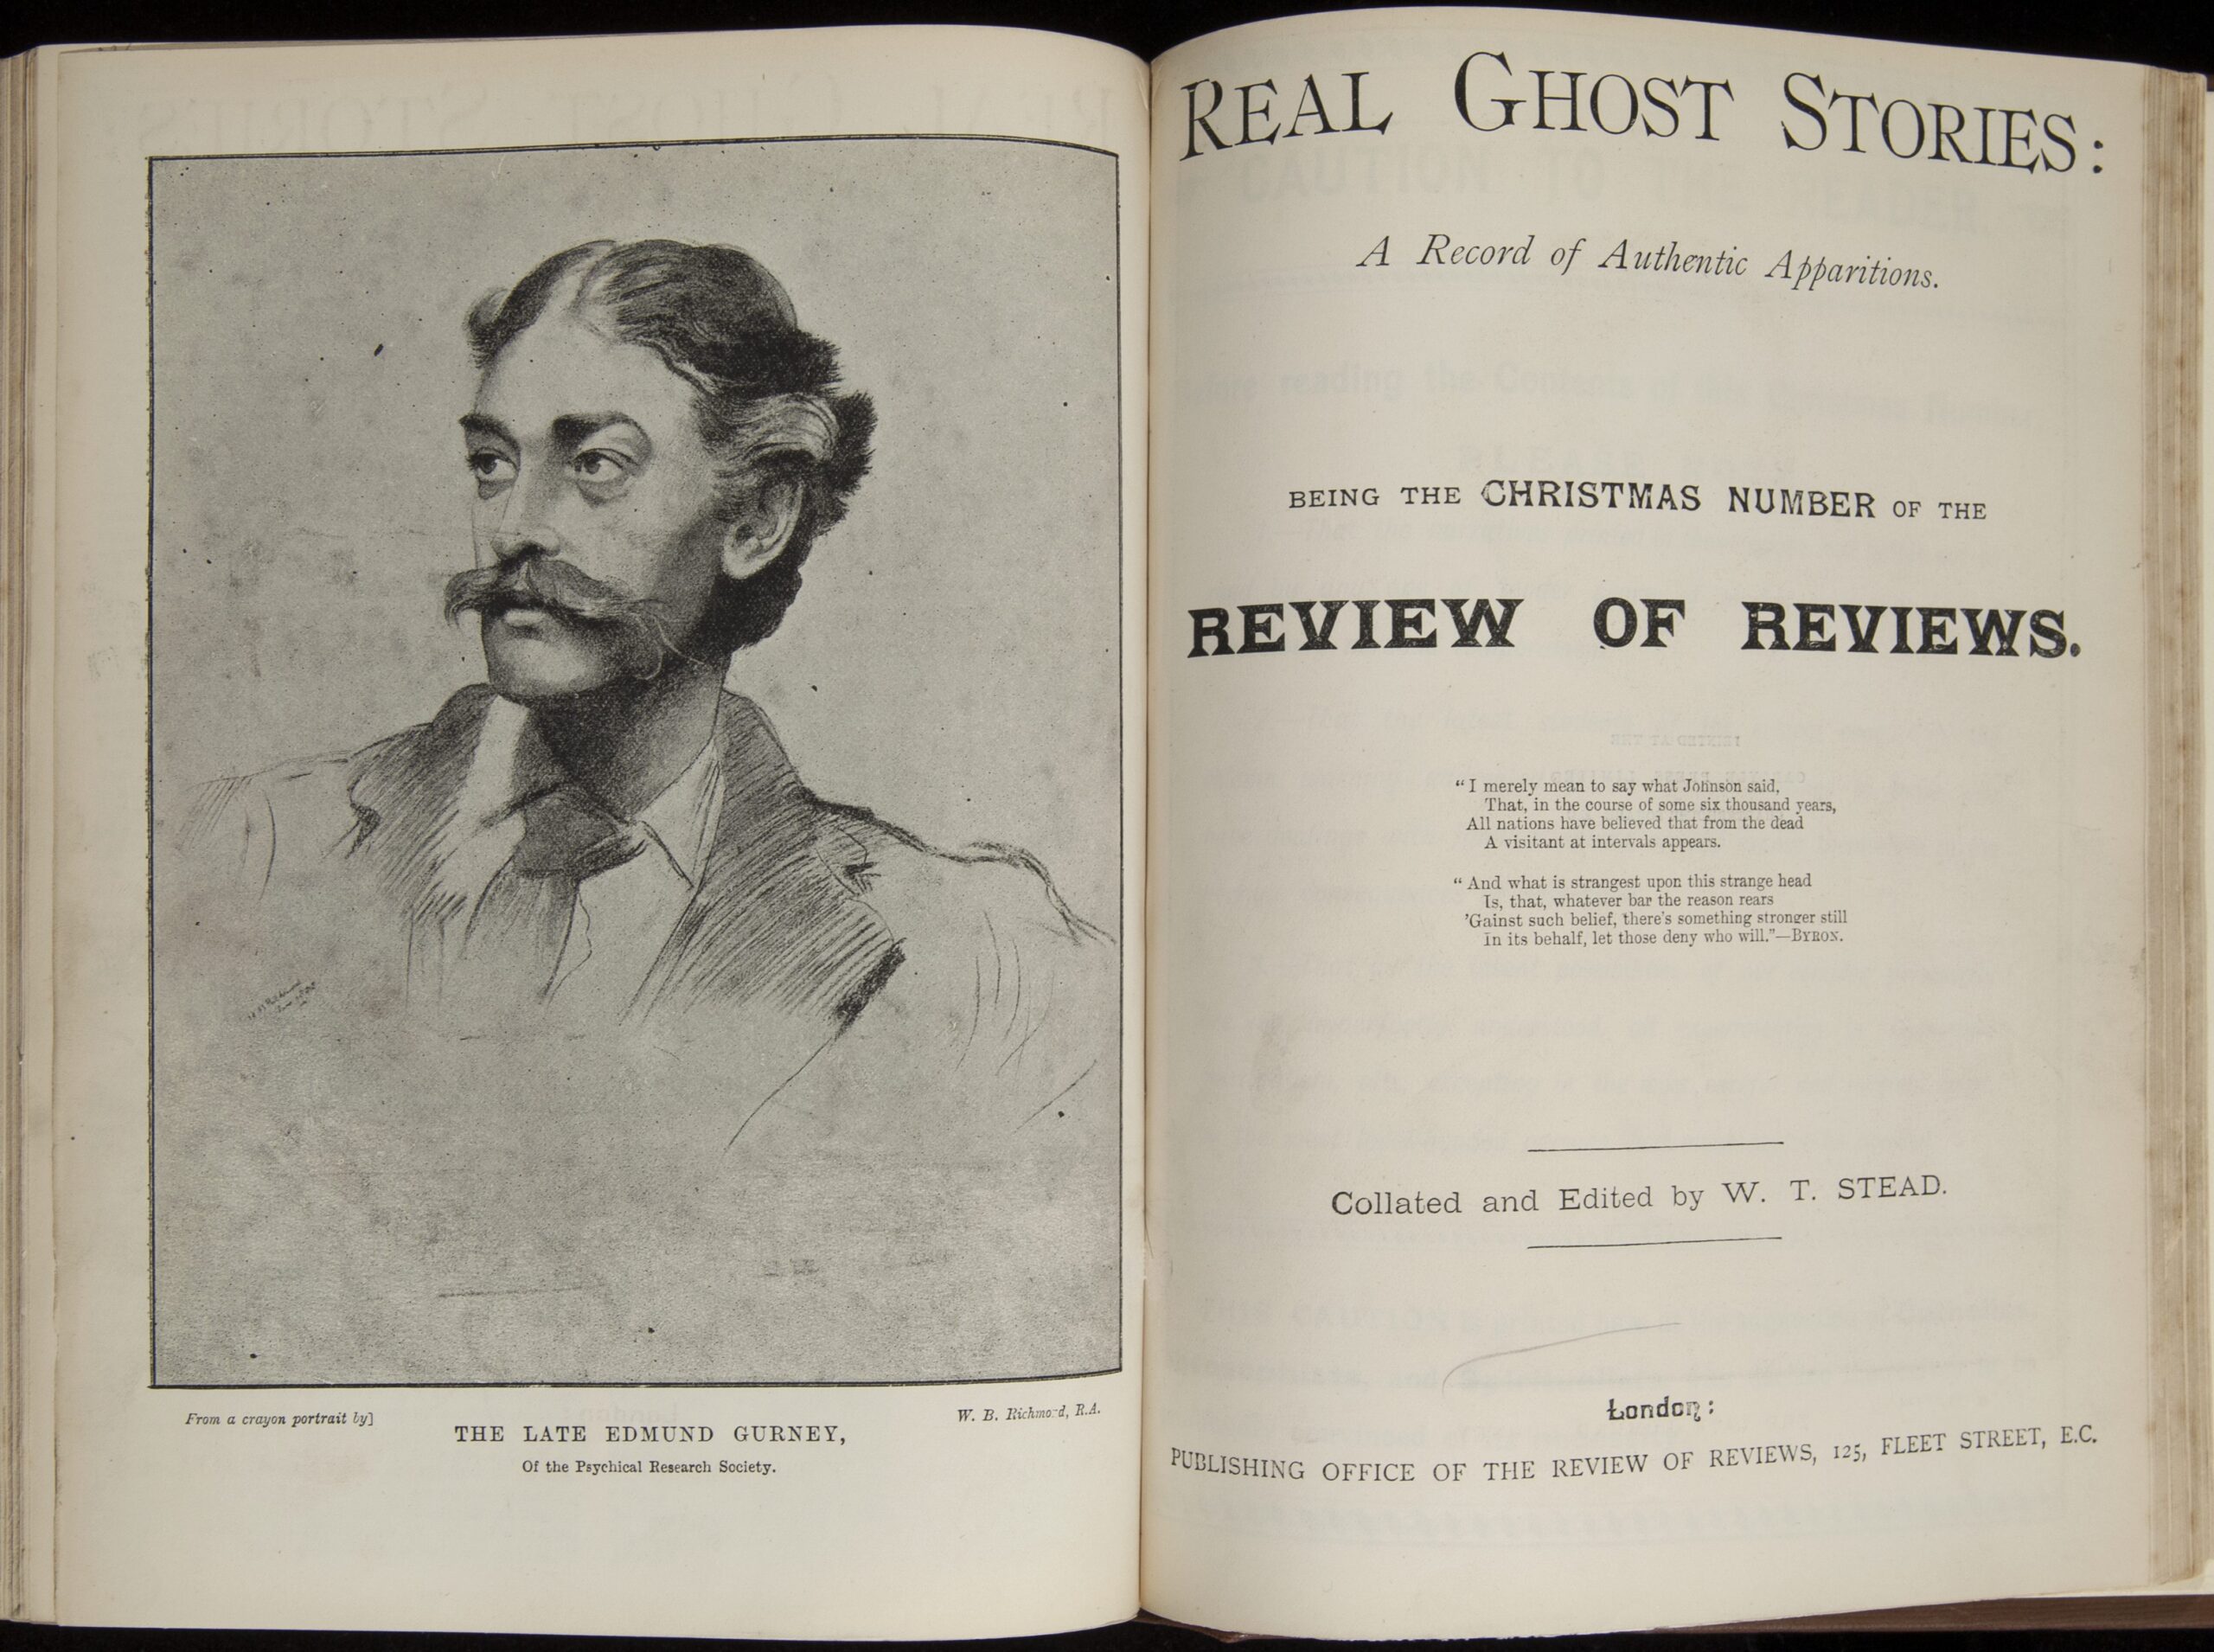 Page of text and facing portrait of a 'The Late Edmund Gurney' - man with a moustache wearing a suit.